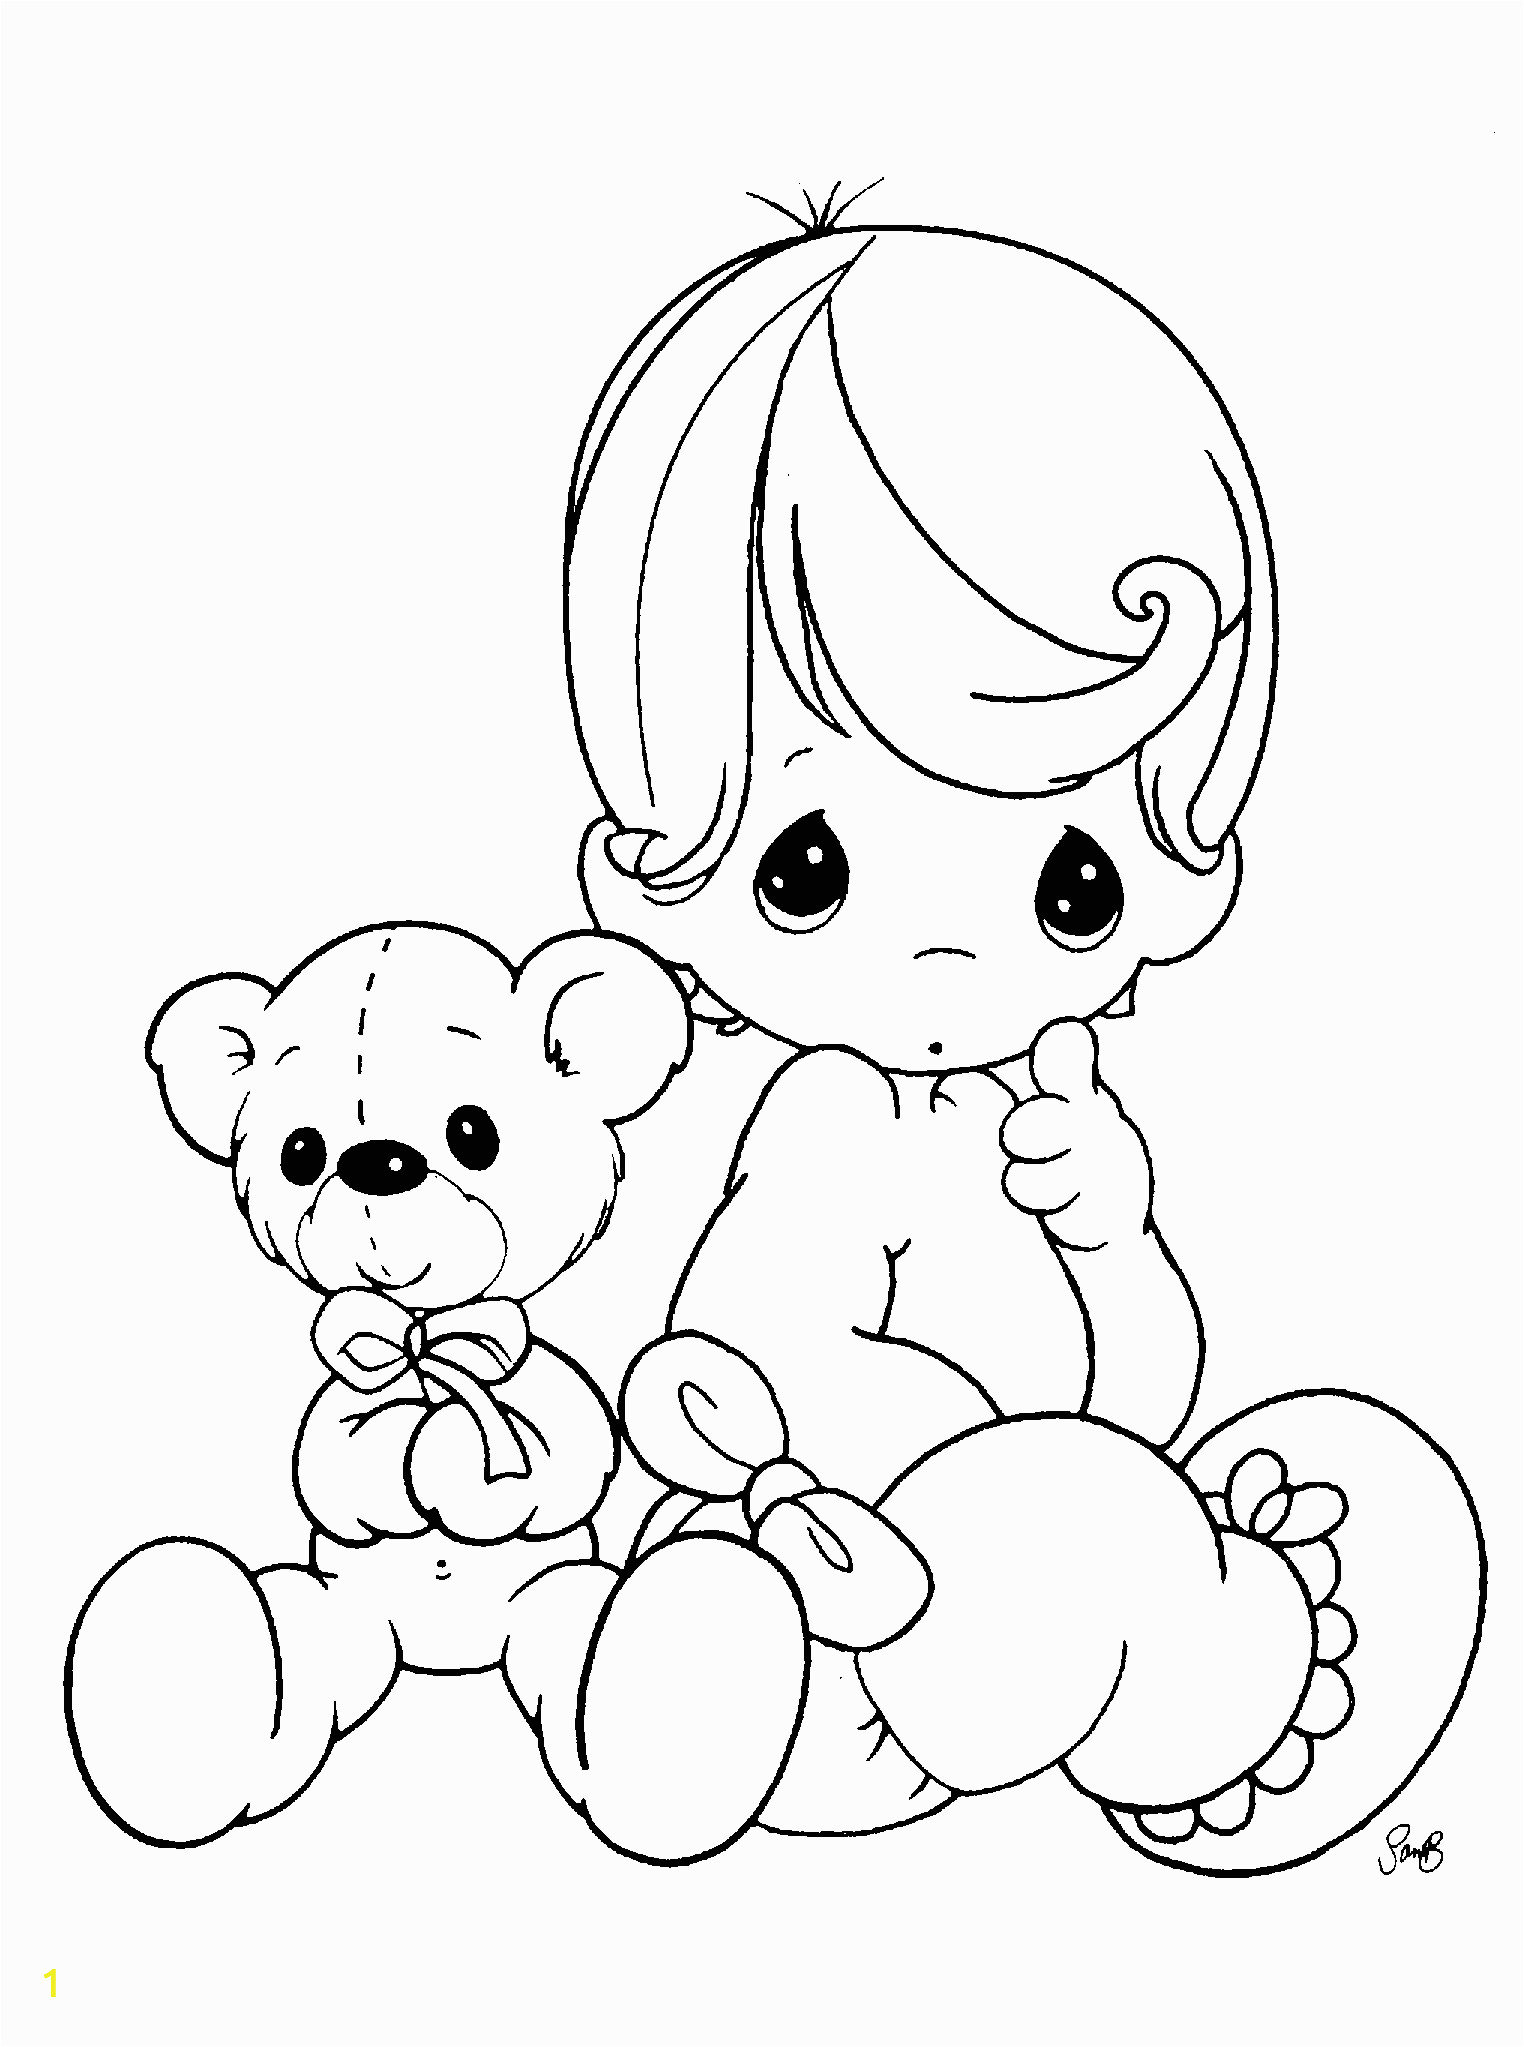 Printable Coloring Pages Of Precious Moments Amazing Coloring Pages Precious Moments Coloring Pages